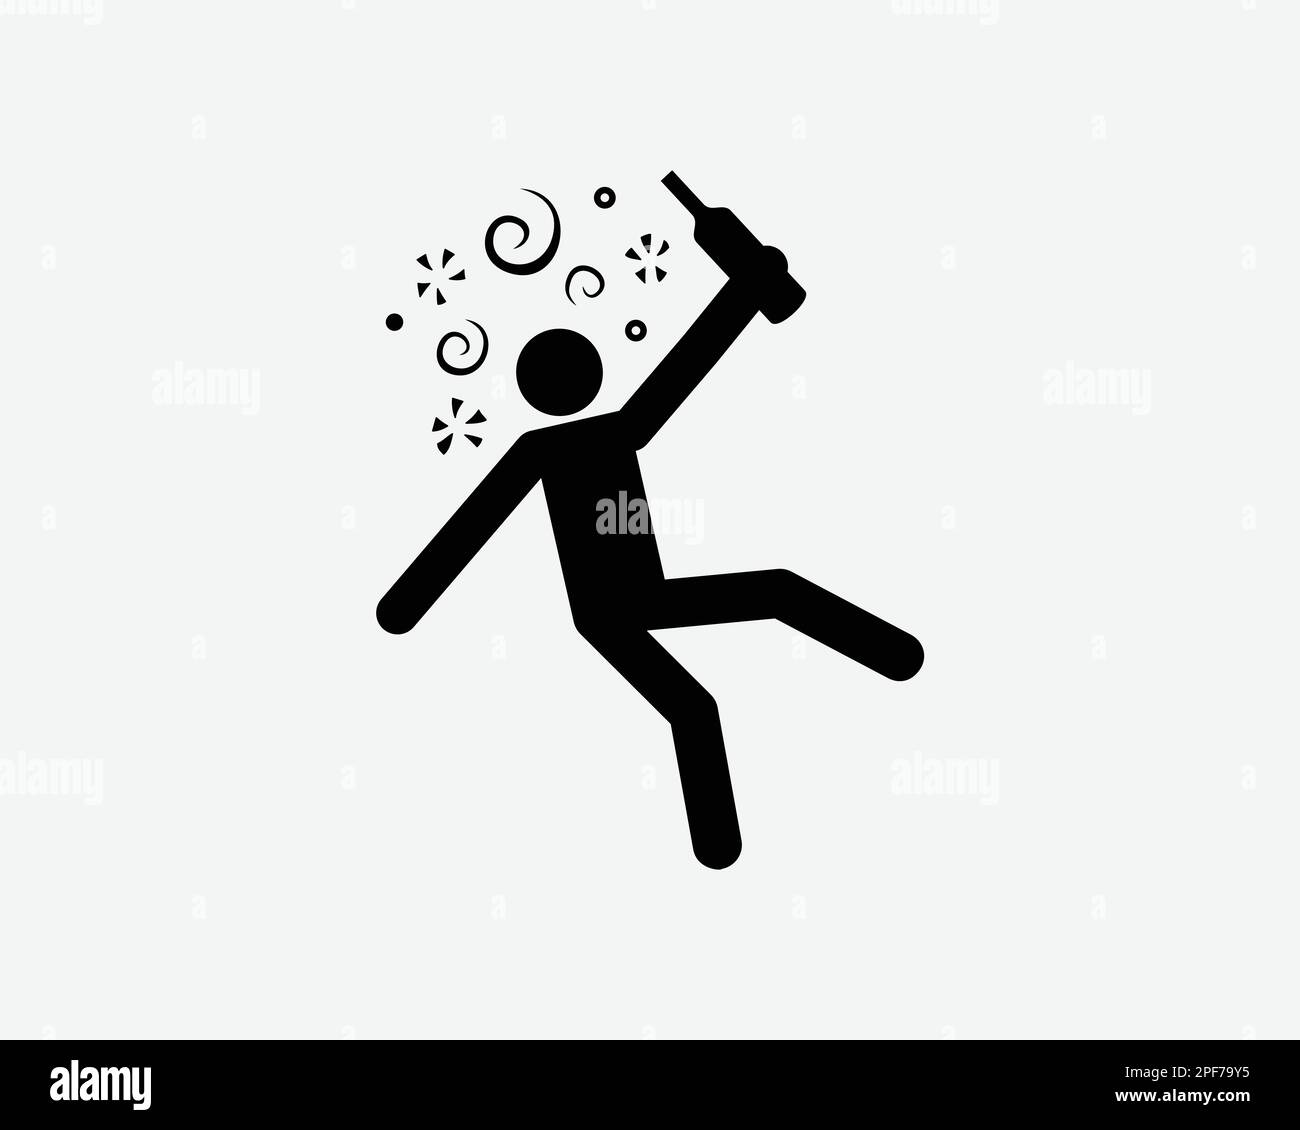 Drunk Person Icon Intoxicated Alcohol Drink Drinking Dizzy Vector Black White Silhouette Symbol Sign Graphic Clipart Artwork Illustration Pictogram Stock Vector